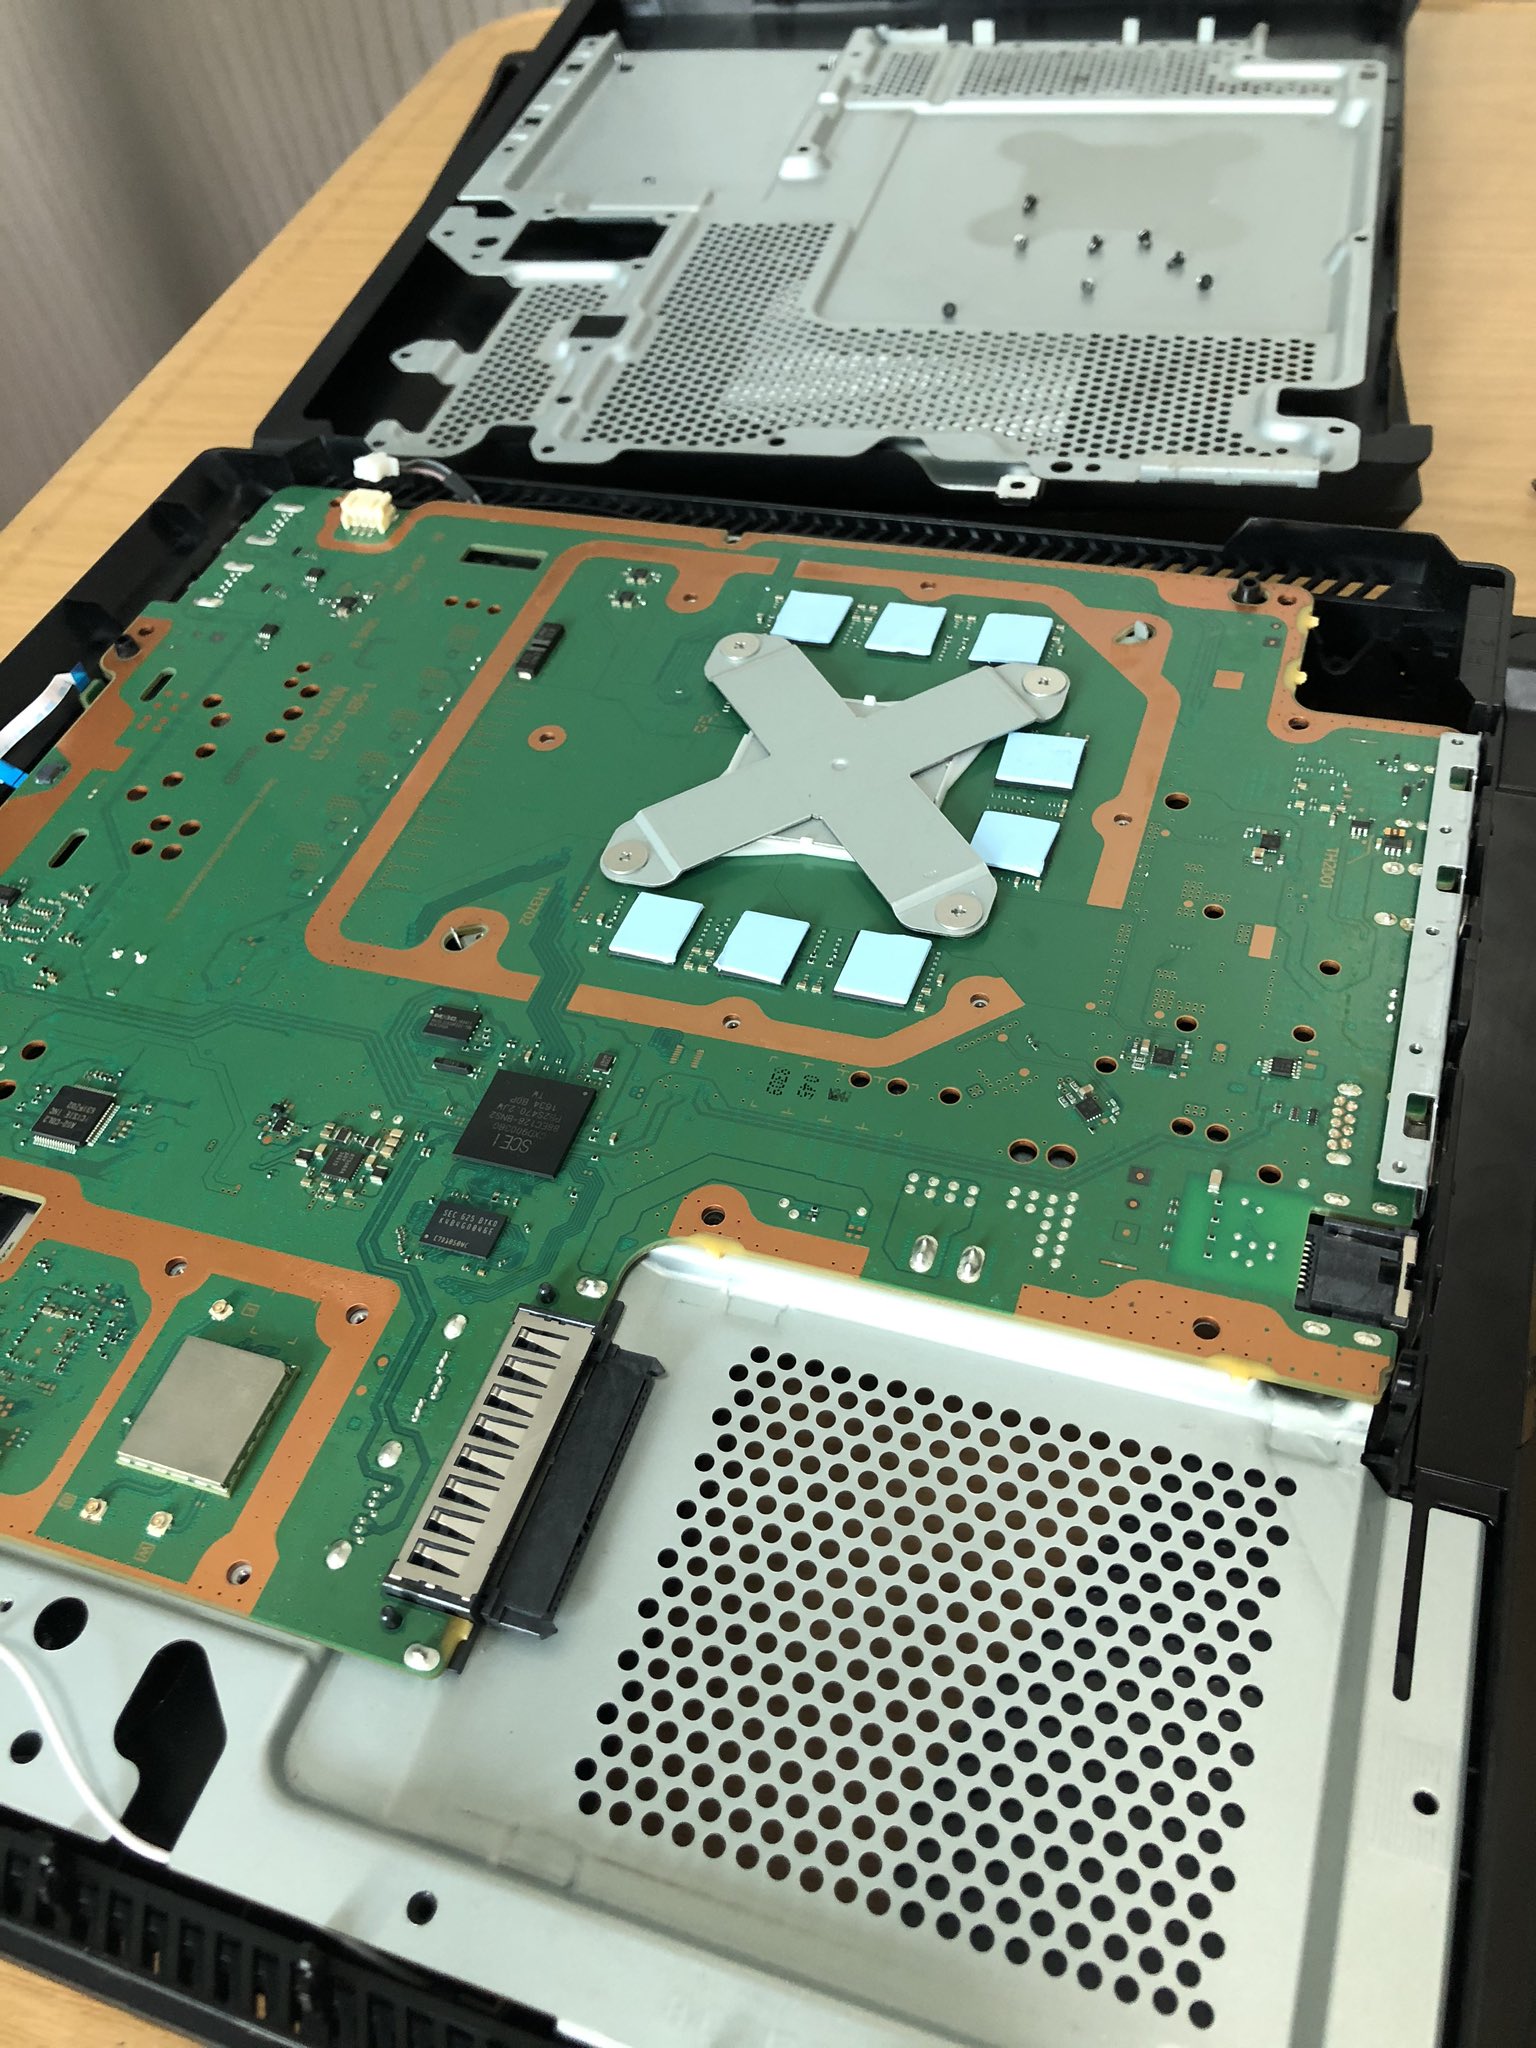 frugtbart spids linse Dizzy Ziddy on Twitter: "Went and opened up my PS4 Pro to replace the thermal  pads and redid the thermal paste (X-Shape!) What a difference it makes, the  fan doesn't go crazy